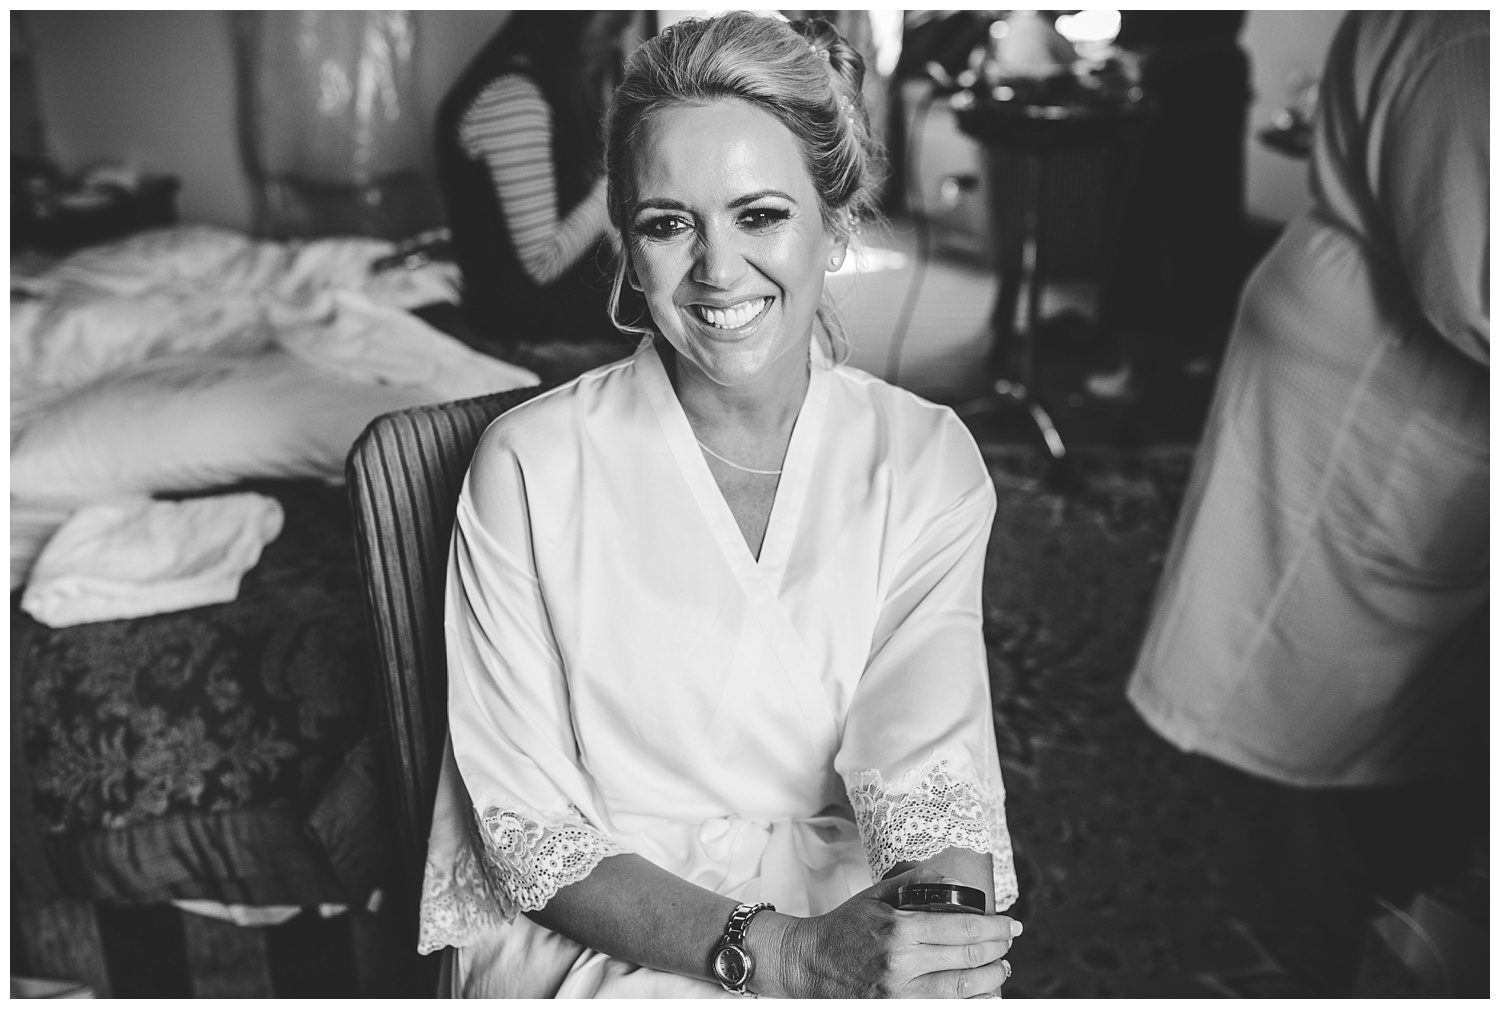 Smiling bride getting ready for her wedding at Peckforton Castle